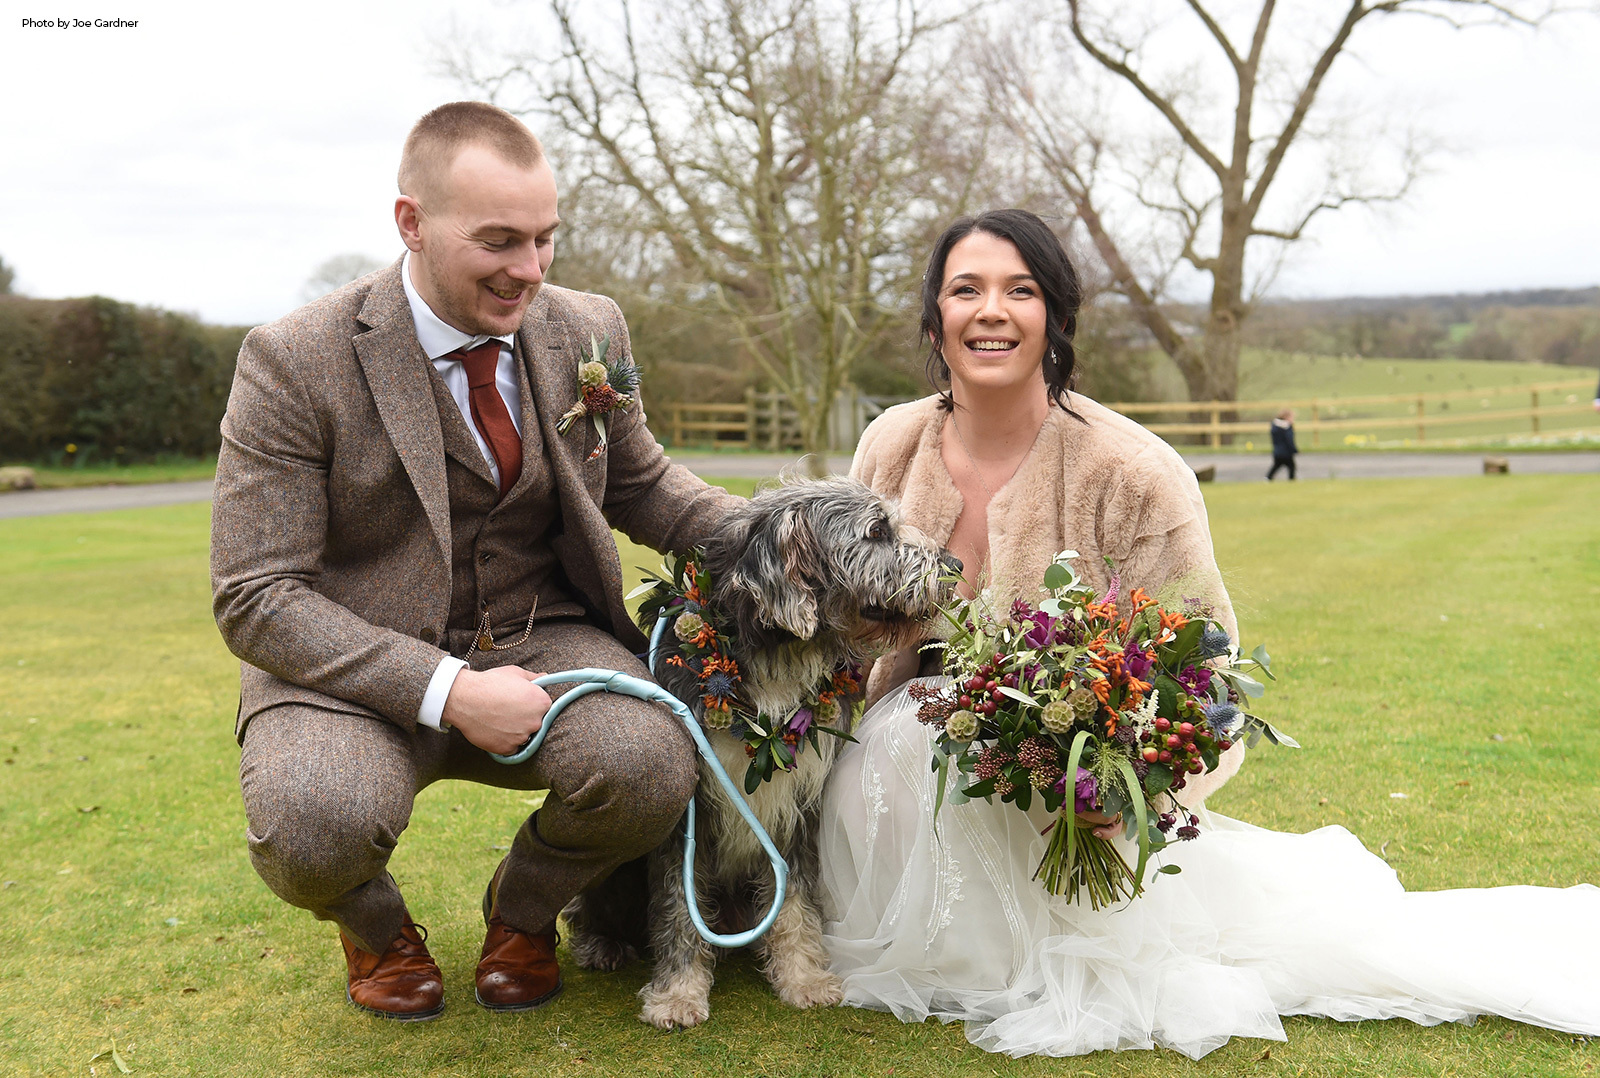 Dog-Friendly Weddings: The Year’s Hottest Trend